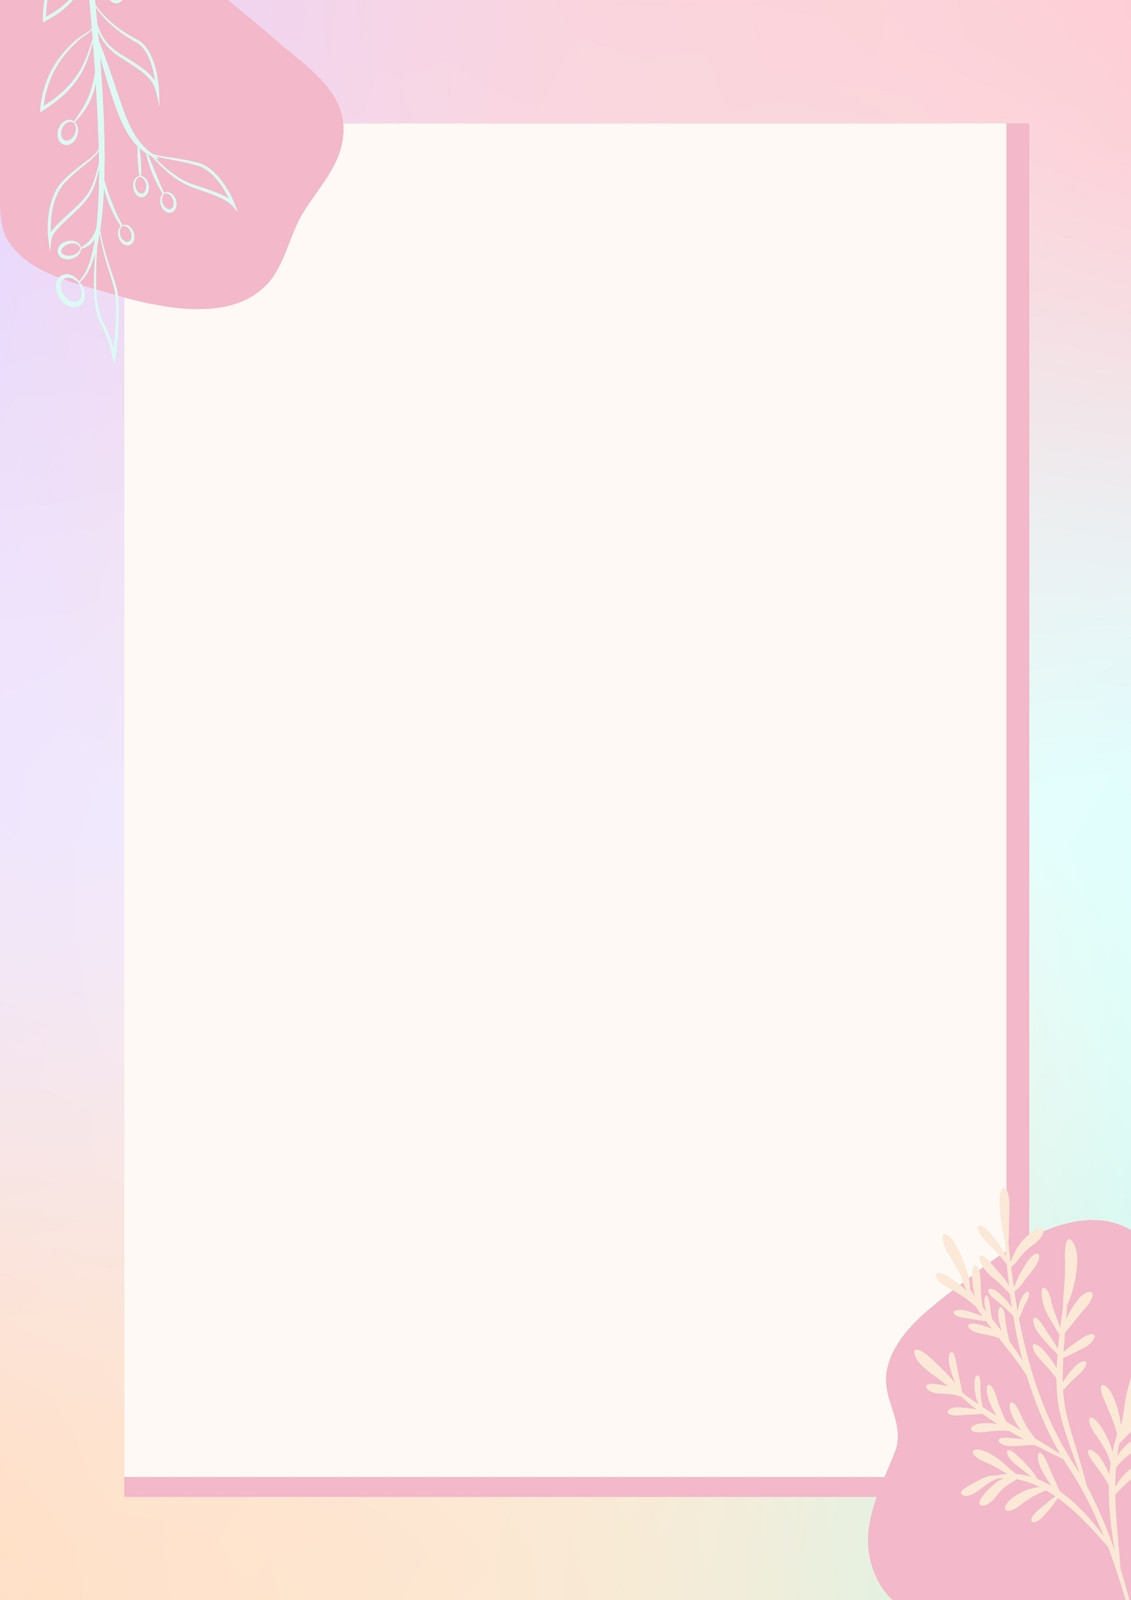 Customize 2,580+ Pink Aesthetic Wallpaper Templates Online - Canva